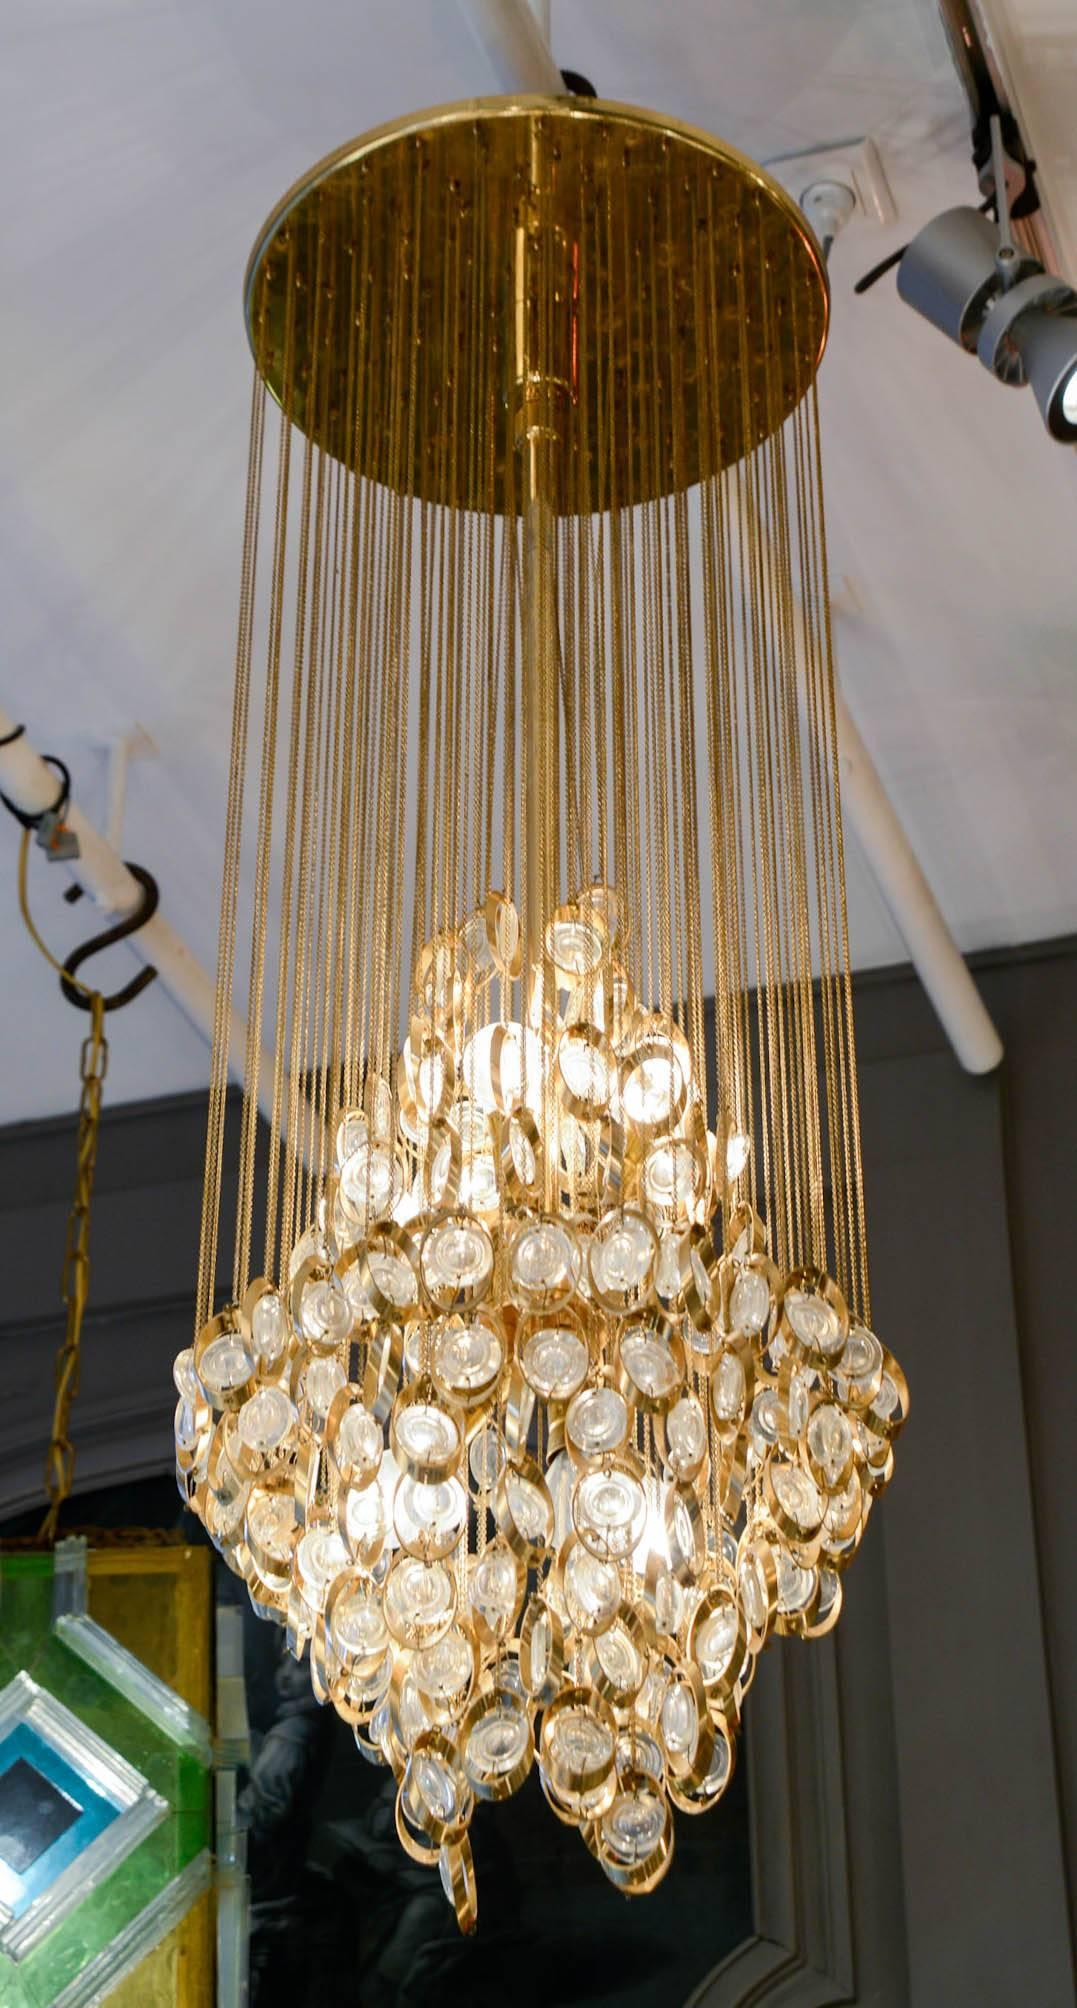 Nice suspension made of a circular plate from where hangs tens of thin chains attached to brass rings set with glass lenses. The overall is making an interesting pattern hiding the lights.